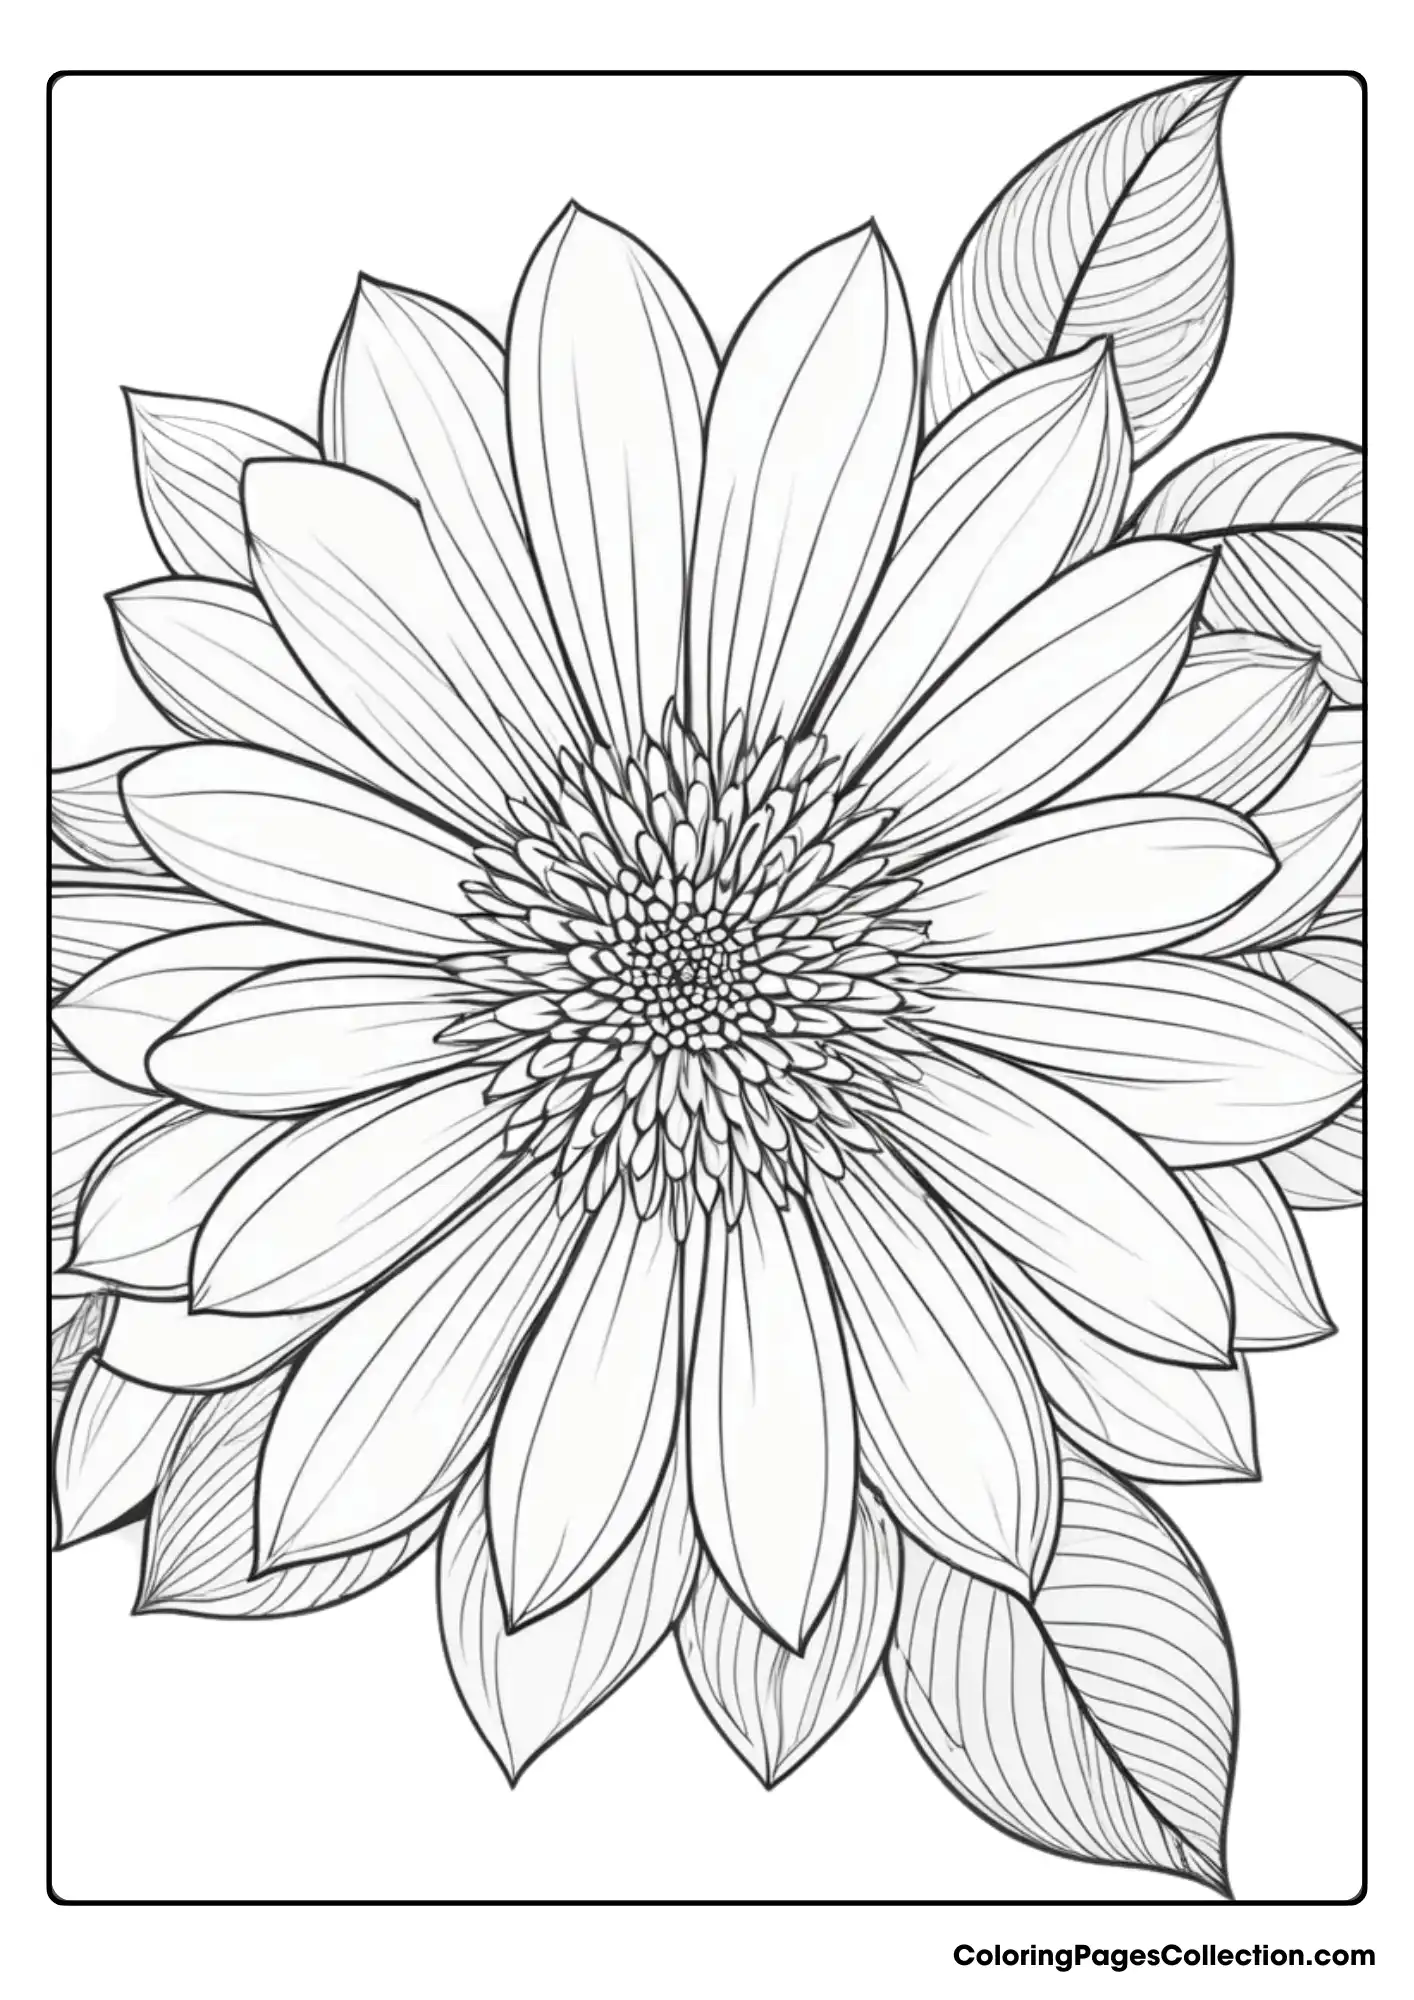 Coloring pages for teens, Realistic Sunflower Coloring Page For Teens